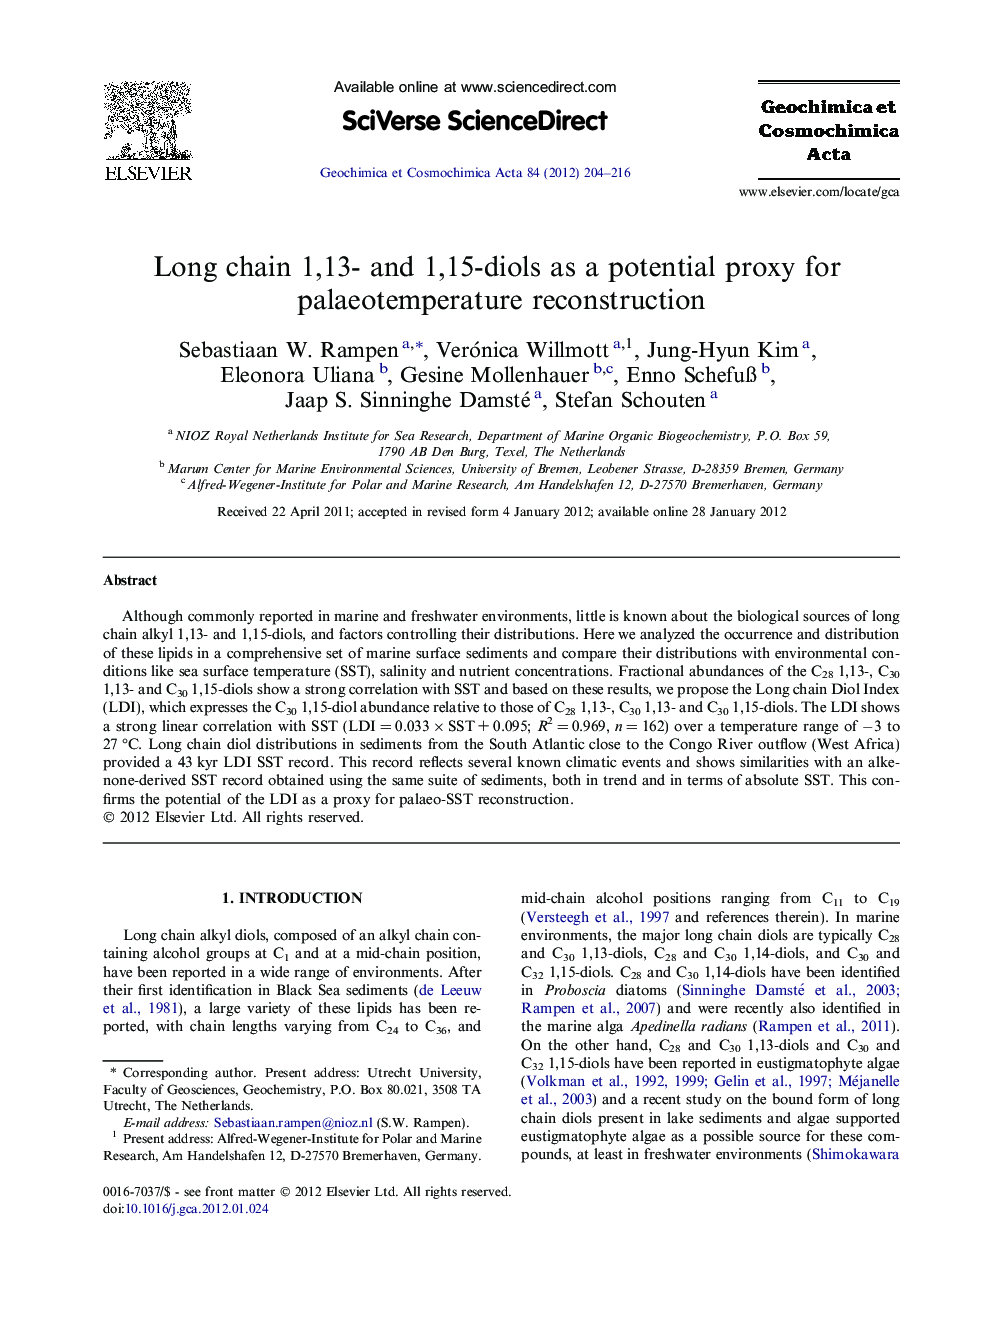 Long chain 1,13- and 1,15-diols as a potential proxy for palaeotemperature reconstruction